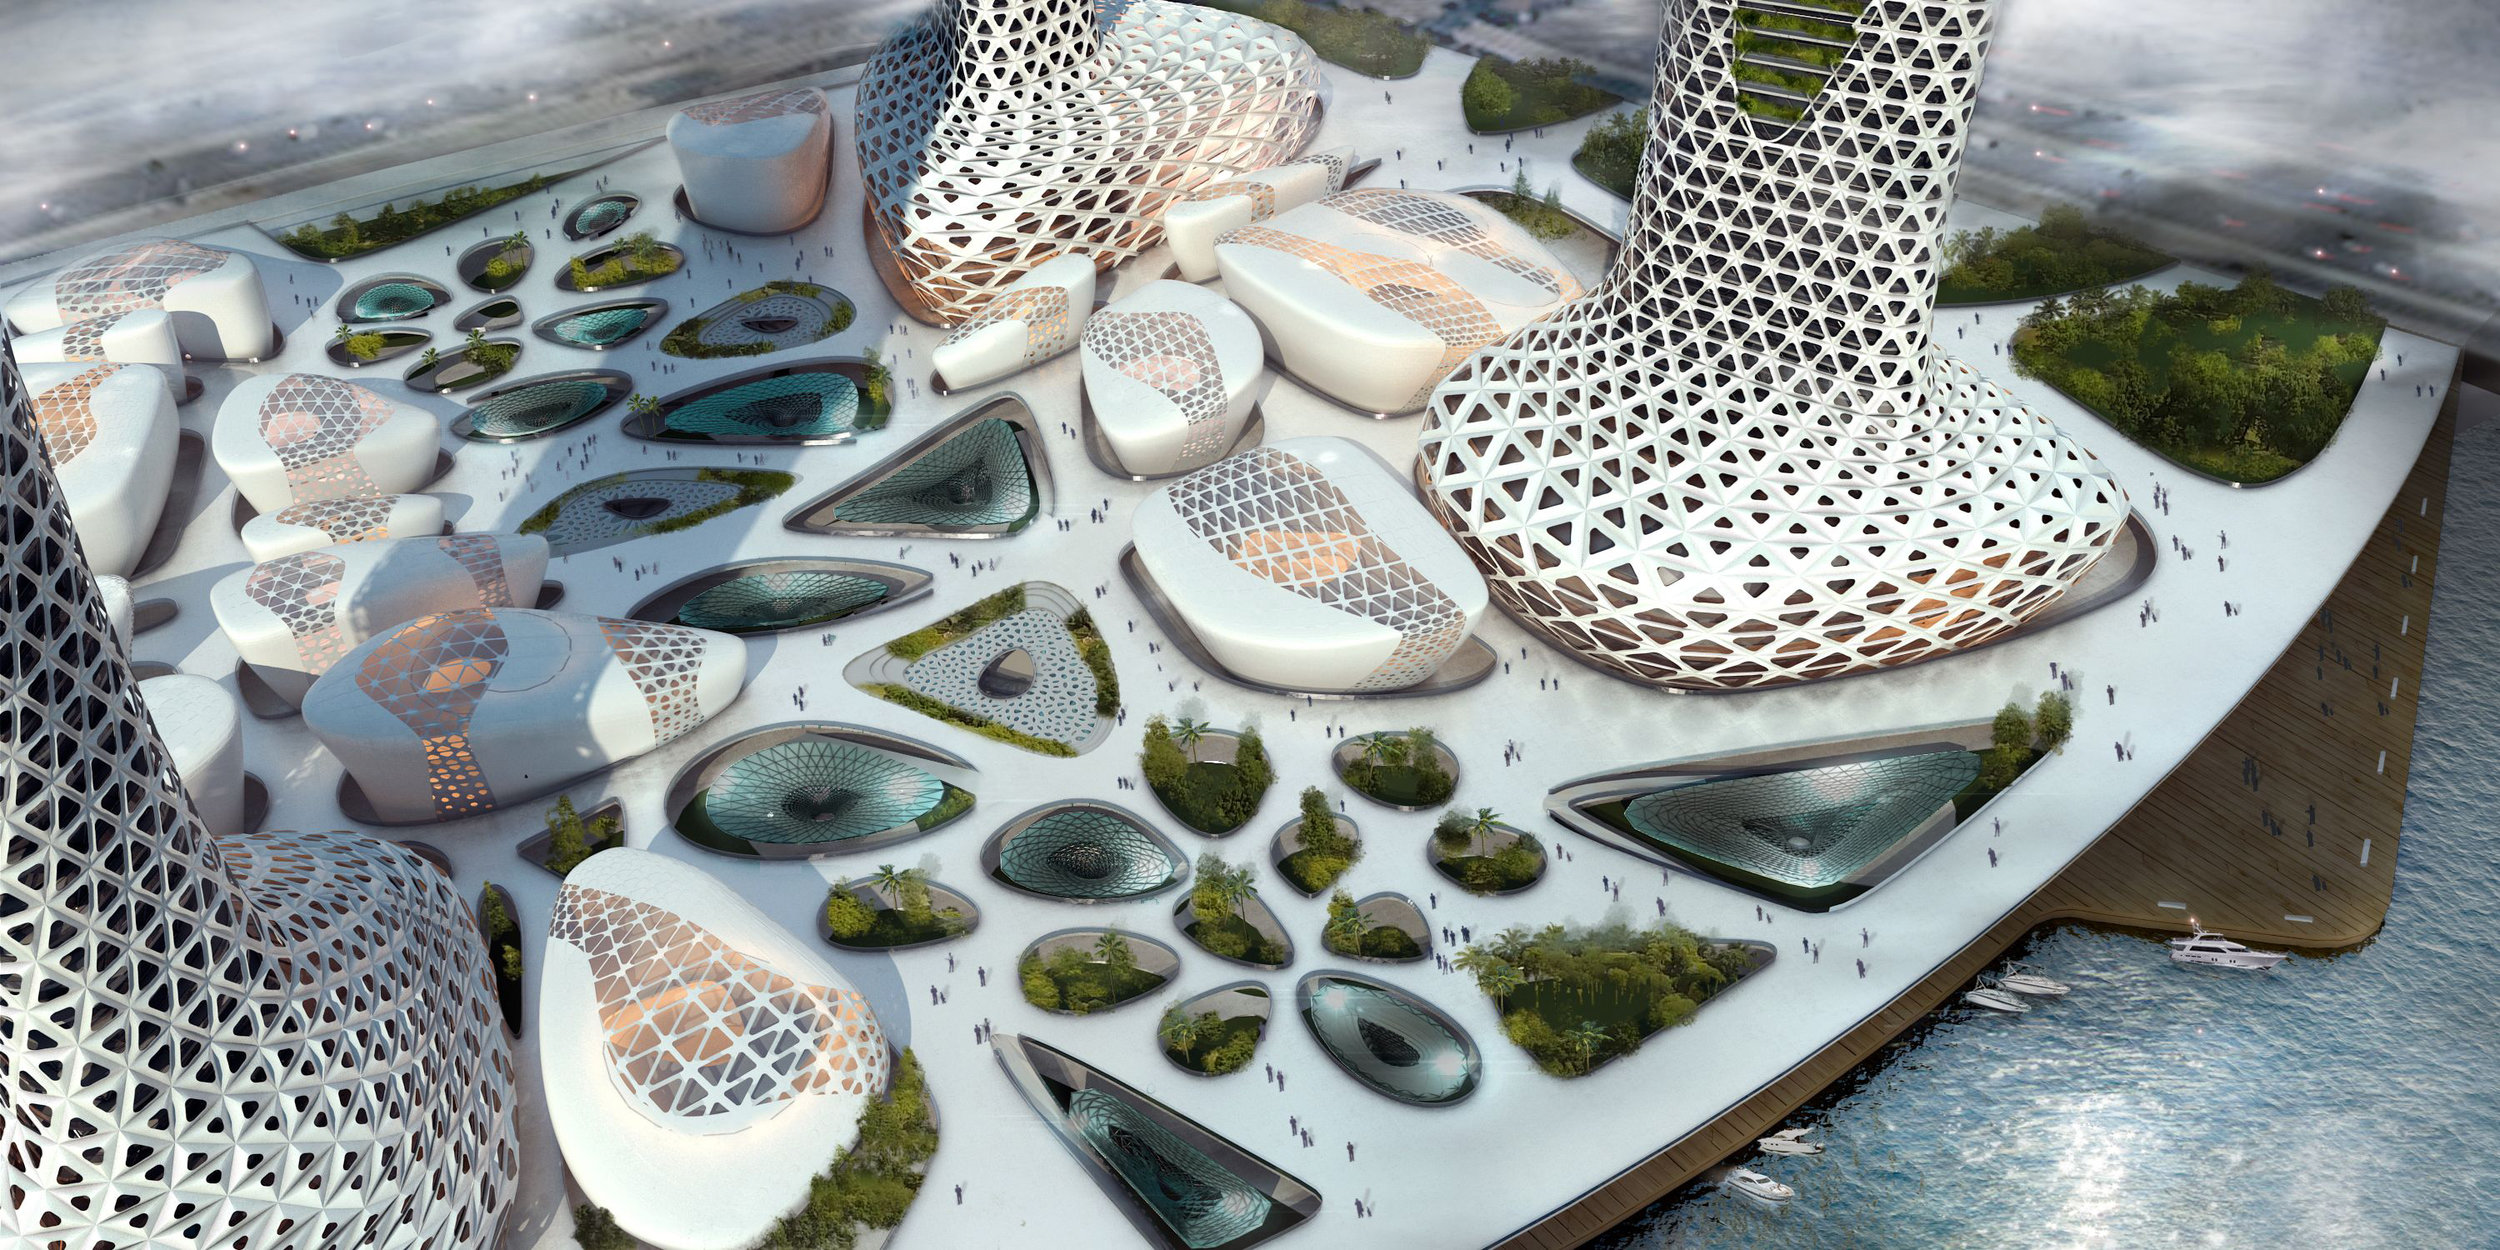 The Symbiotic Towers: The Most Sustainable Project In Dubai